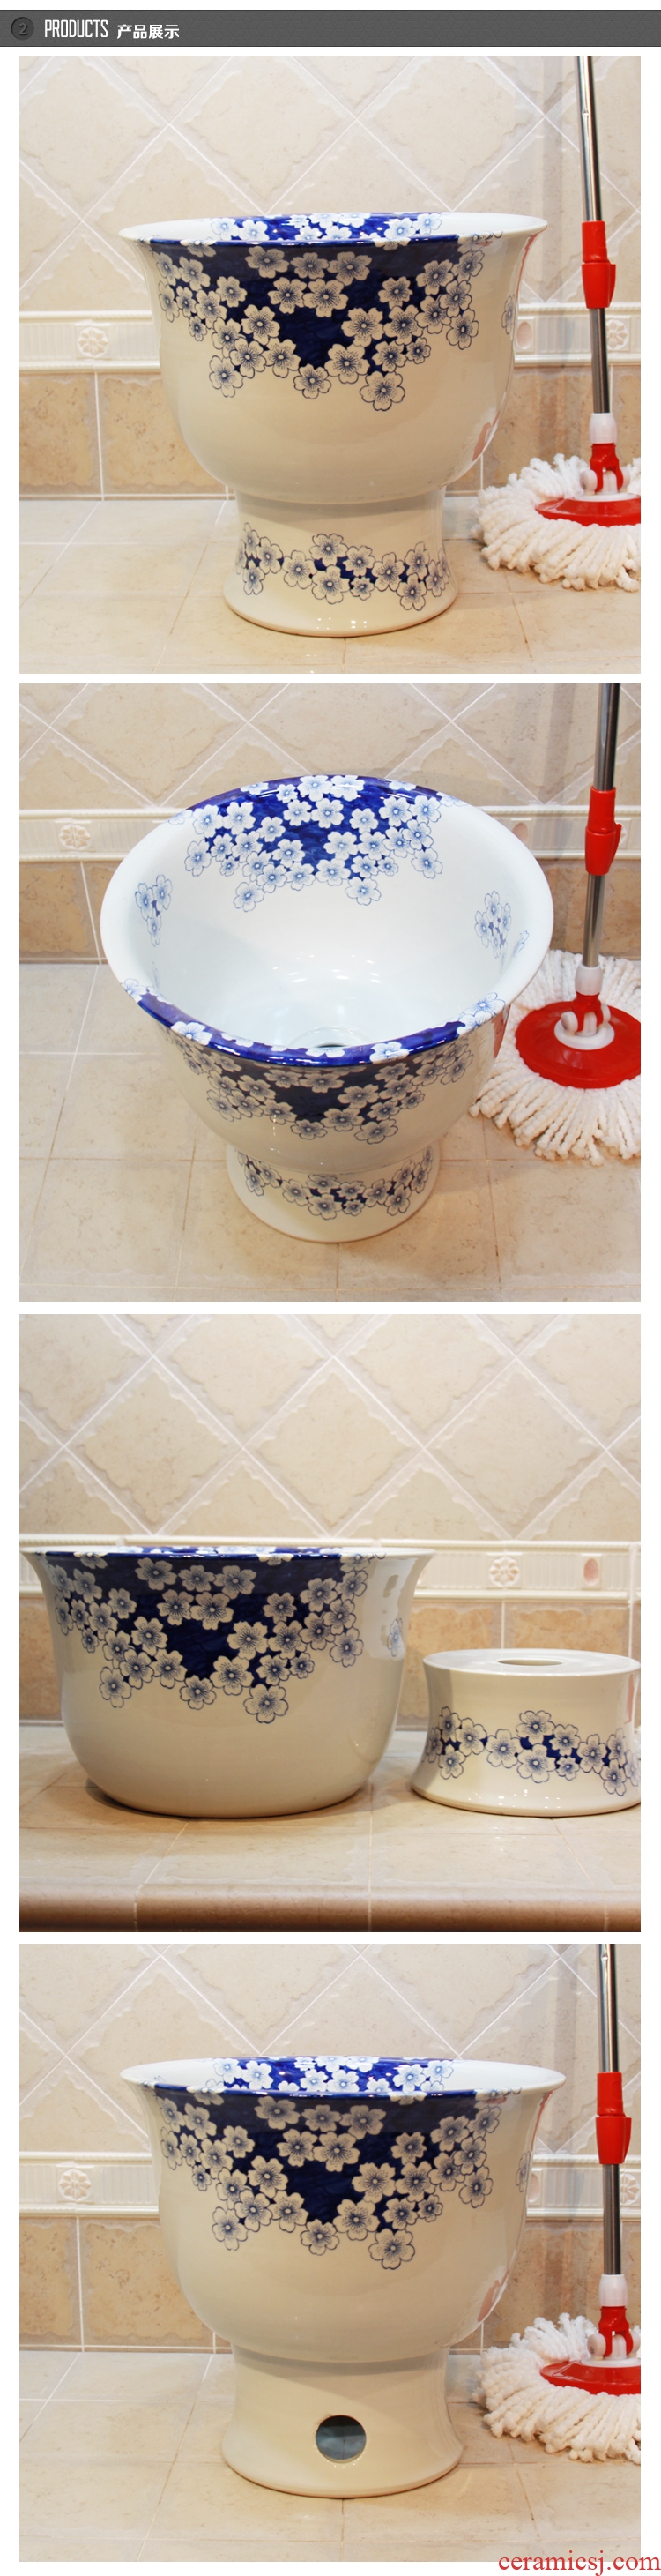 Jingdezhen ceramic JingYuXuan blue-and-white many fission mop pool pool mop bucket under the mop bucket